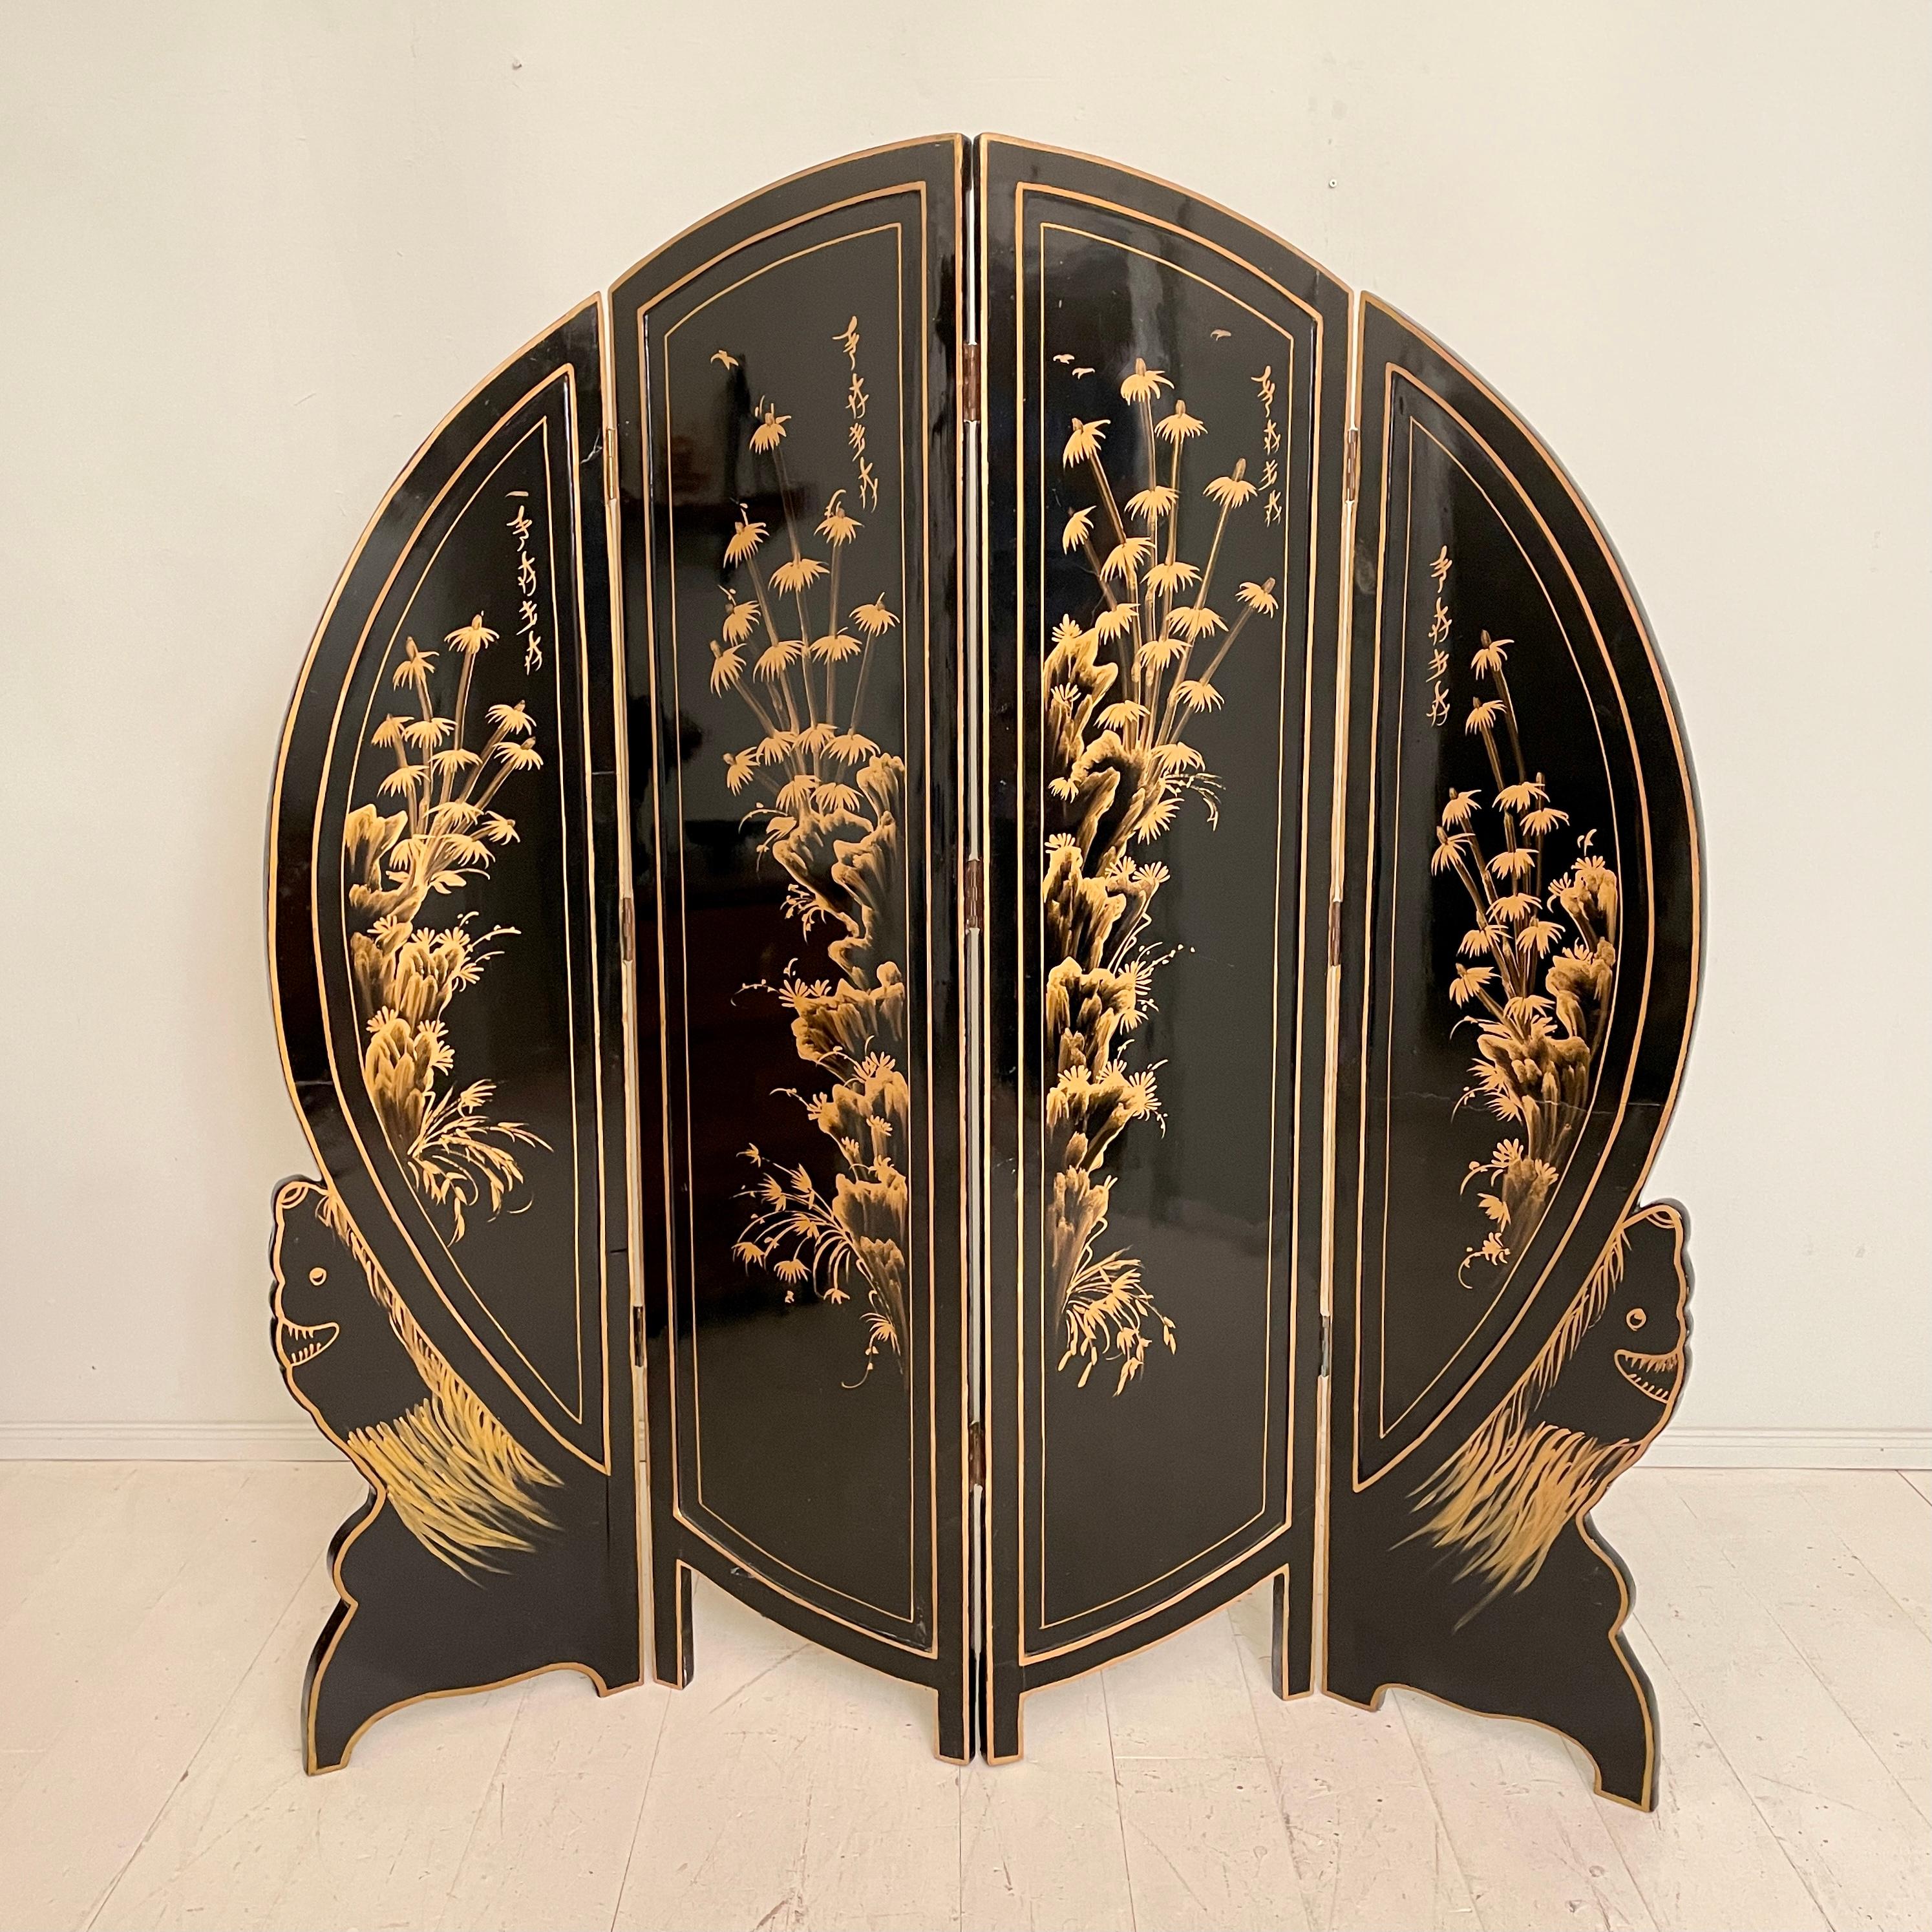 This beautiful Chinoiserie and Black Lacquer Four-Panel Folding Screen Room Divider was made in the 1930s.
It has two sides. One brown / orange chinoiserie side with a wonderful landscape and one black lacquer side with flowers. Both sides have